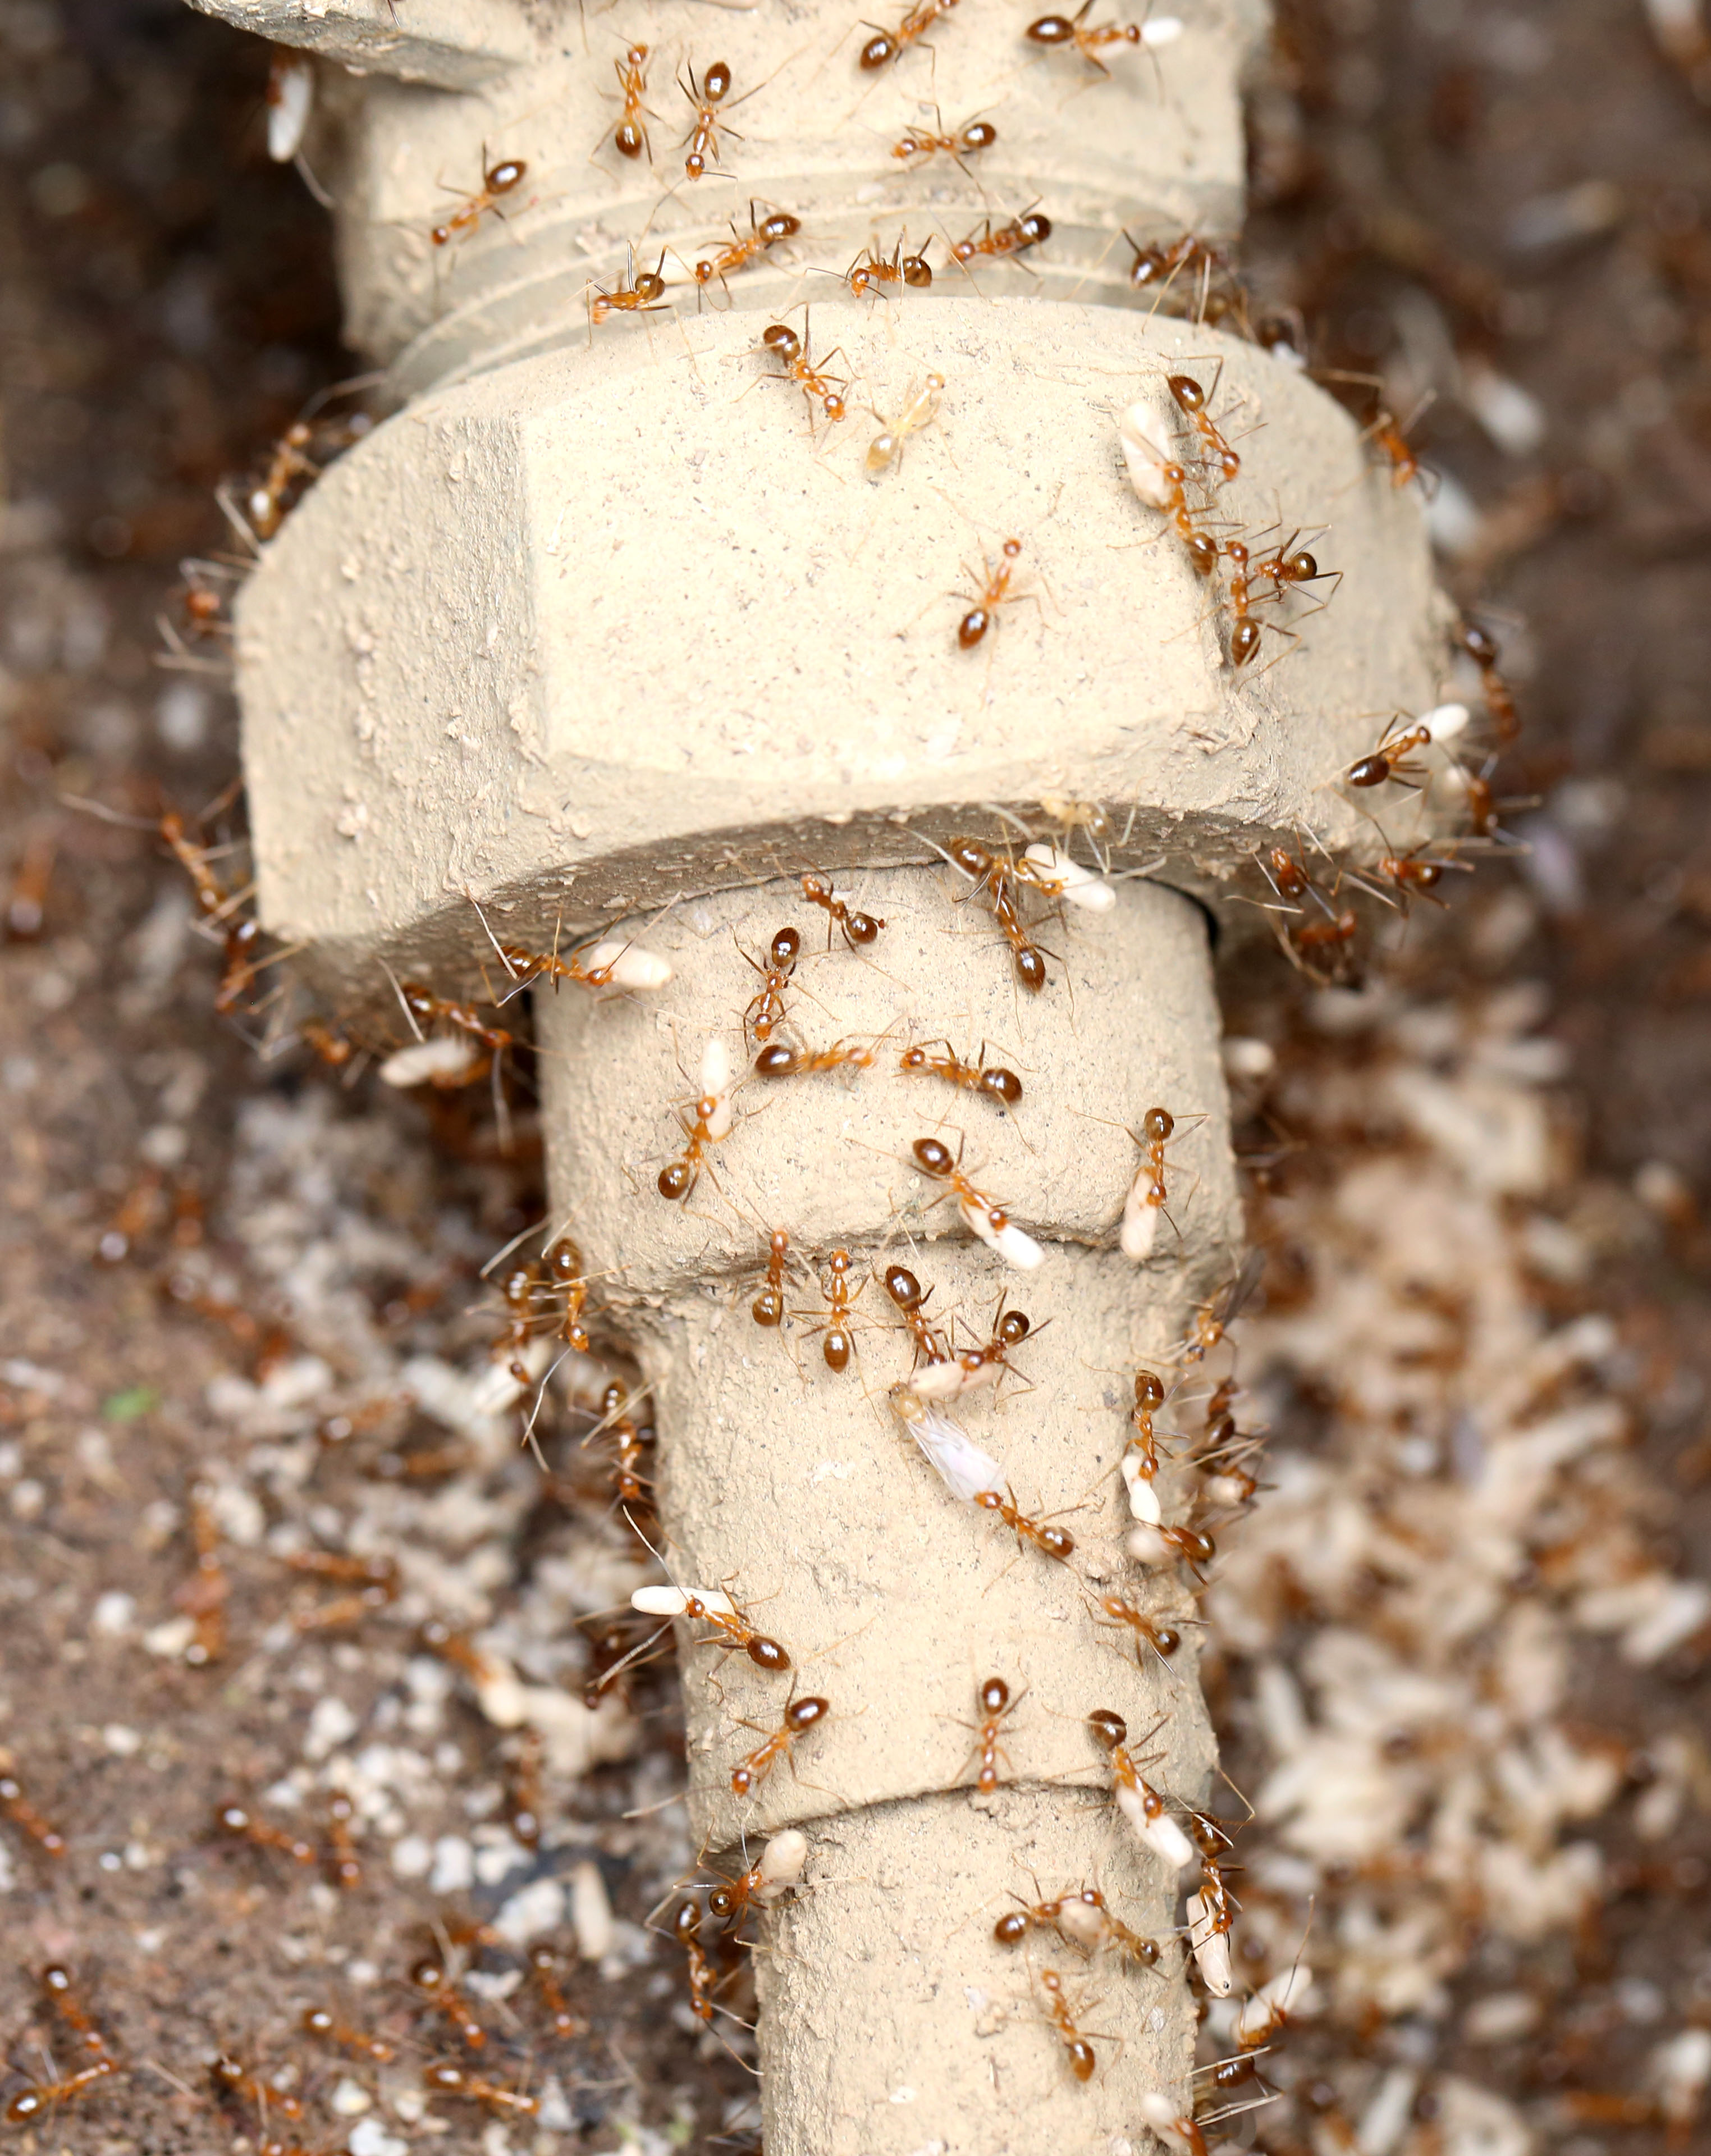 Yellow crazy ants close up. Yellow crazy ants can live in and around pipes.